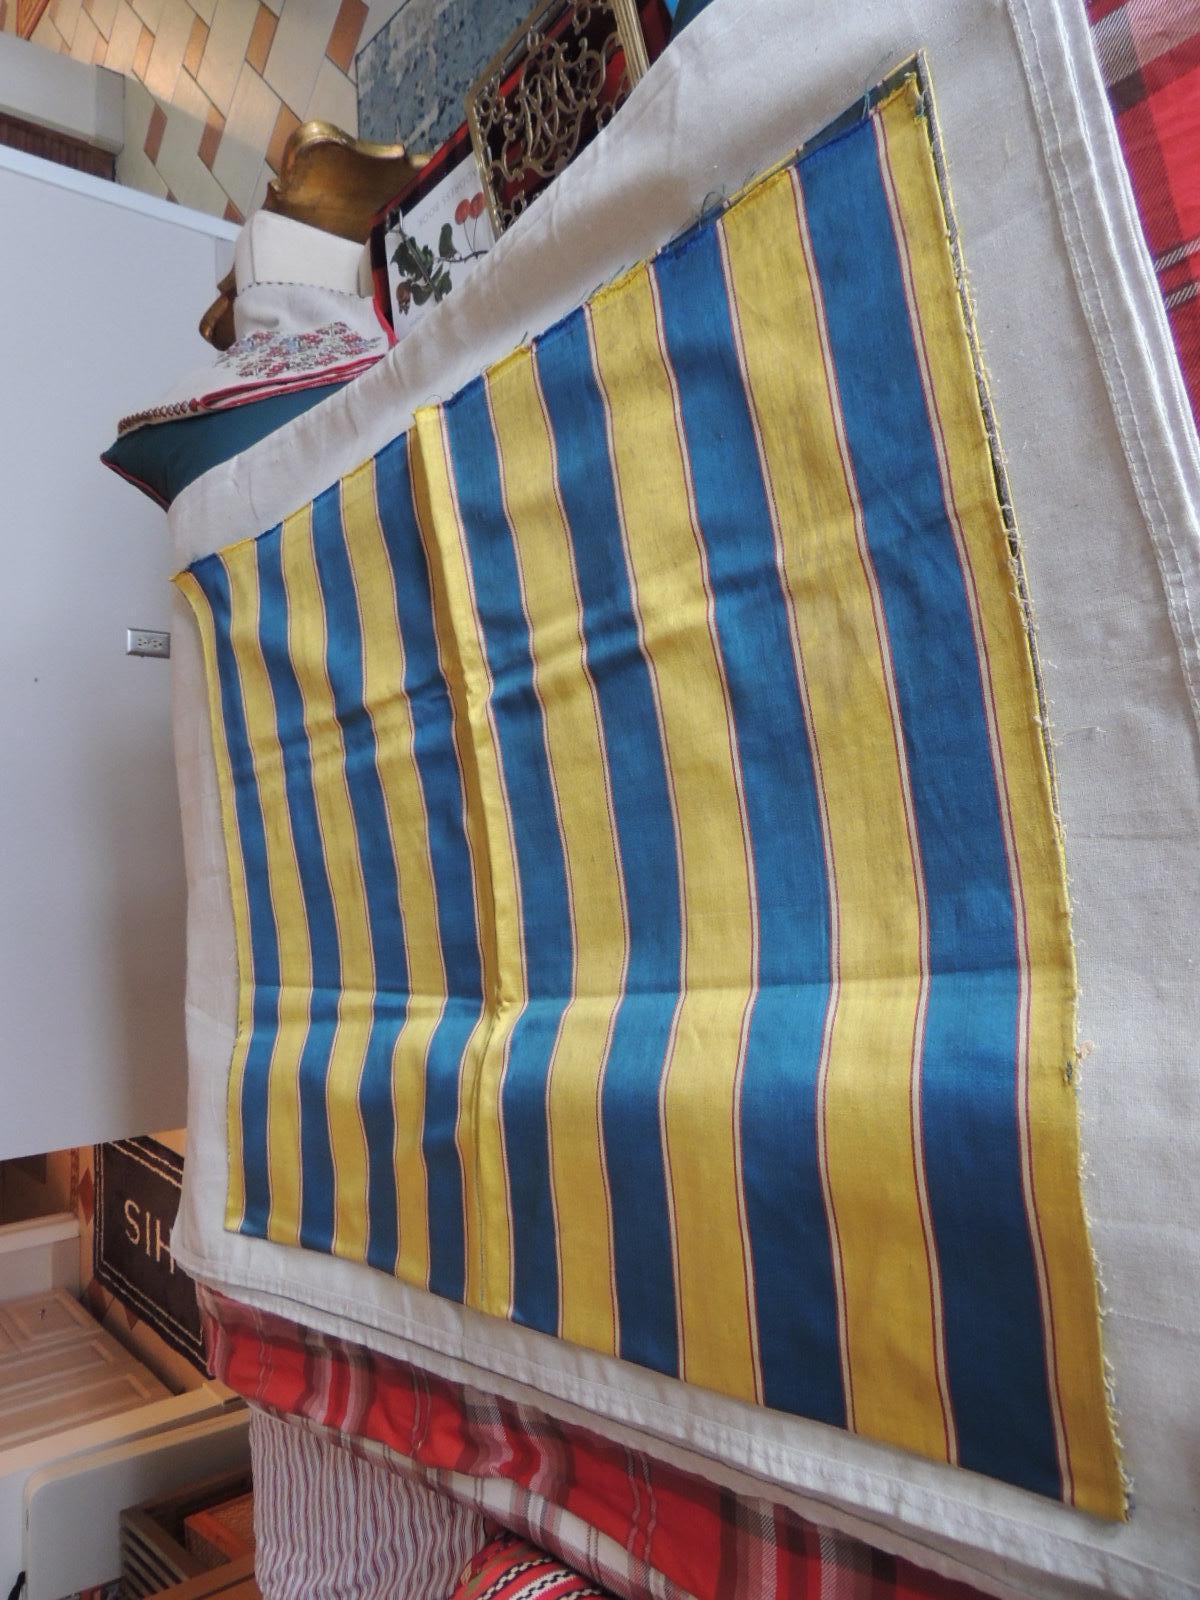 Antique yellow and blue Empire stripes textile panel with red accent stripe.
In shades of yellow, blue and red.
Ideal for pillows or upholstery.
Size: 120